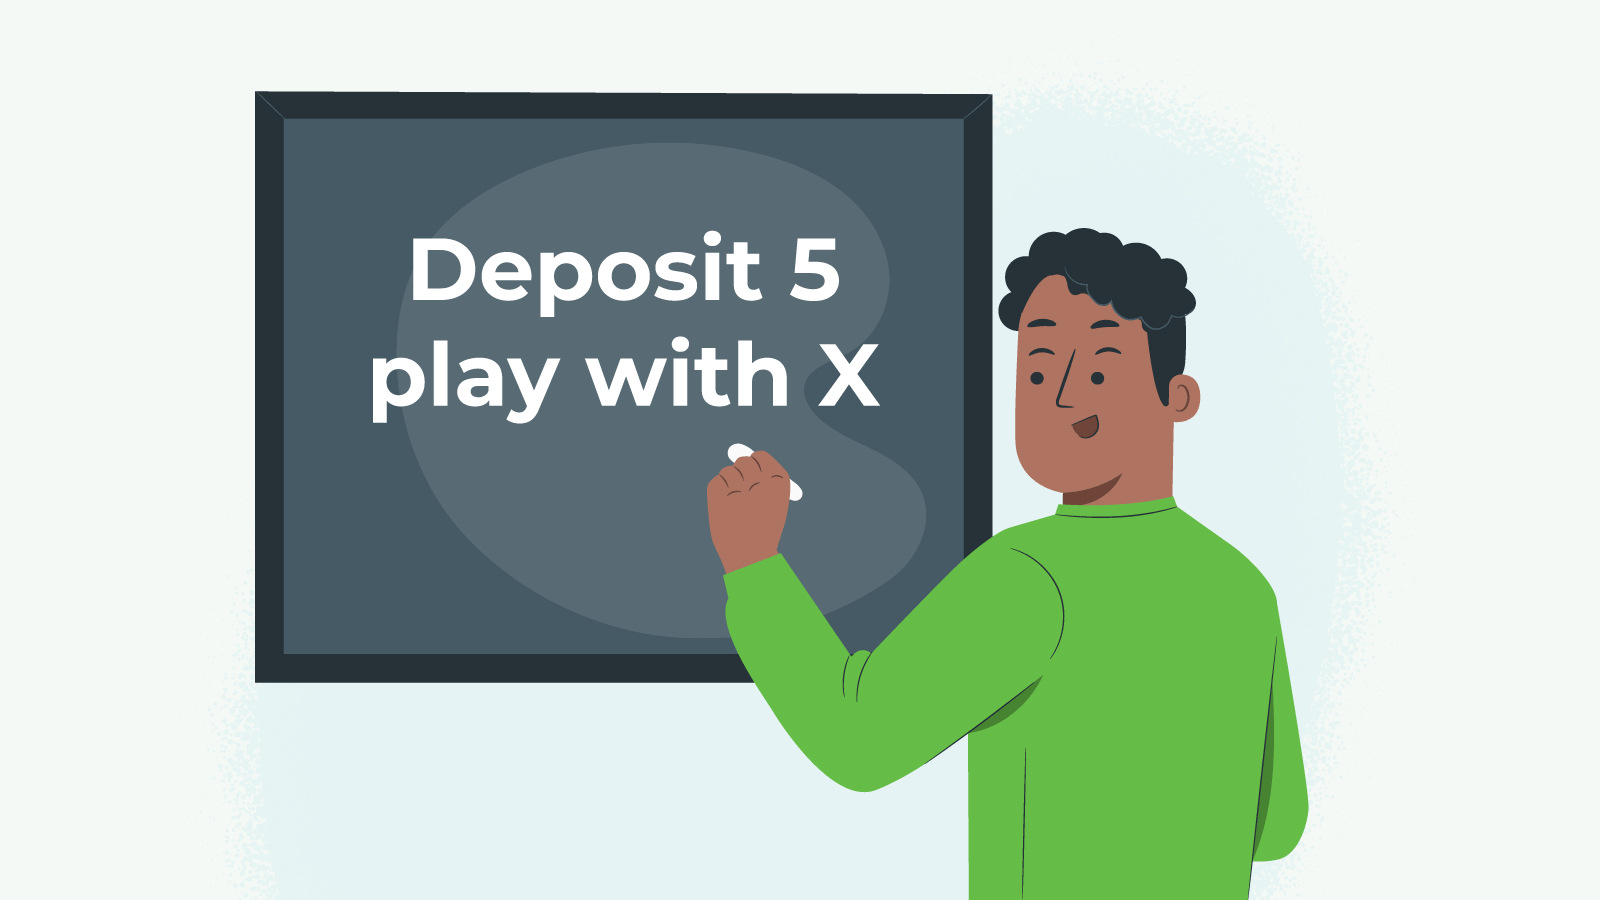 Understanding the “deposit 5 play with X” formula